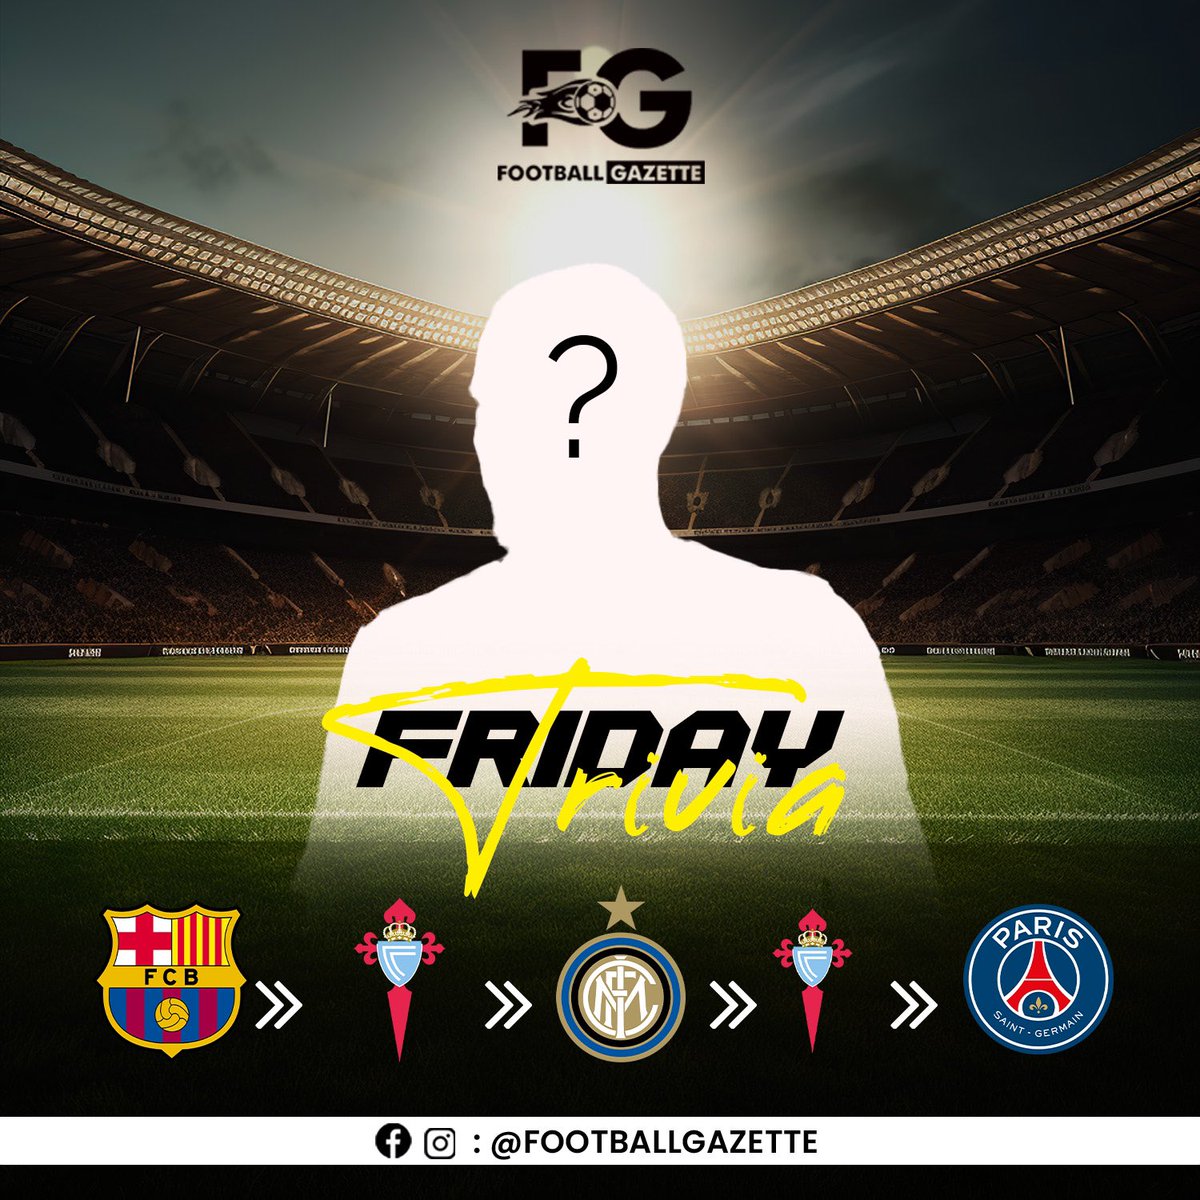 The FOOTBALL GAZETTE Friday Trivia Here!💥 

GUESS THE PLAYER WHO TRANSFERED FROM CLUBS AS INDICATED ABOVE⁉️

#GuessThePlayer #FootballGazette #Trivia